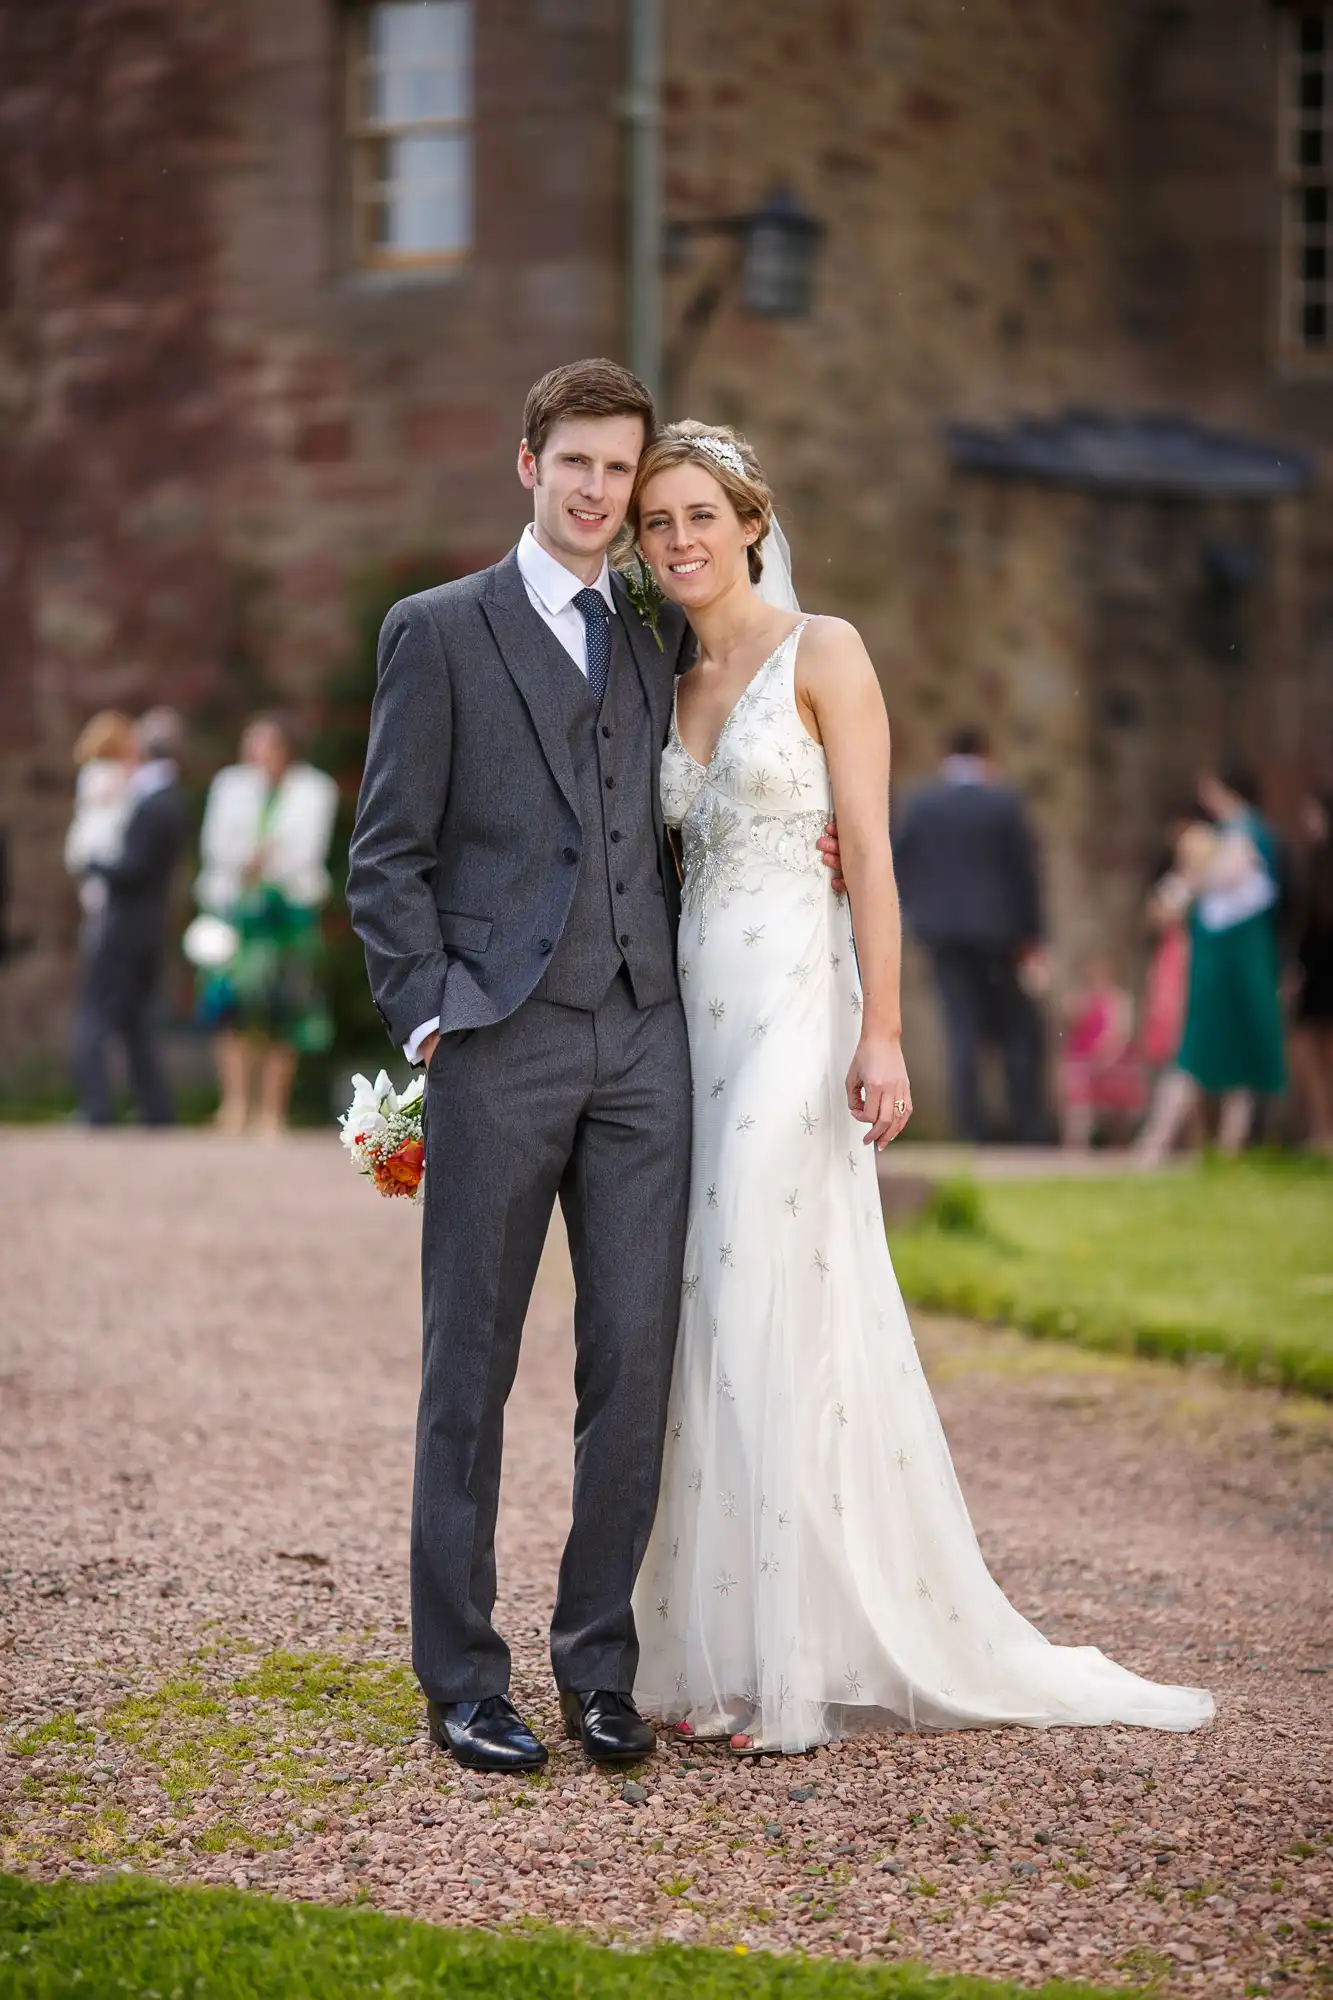 A bride and groom smiling outdoors, the bride in a white dress and the groom in a gray suit, standing on a gravel path with a castle and guests in the background.